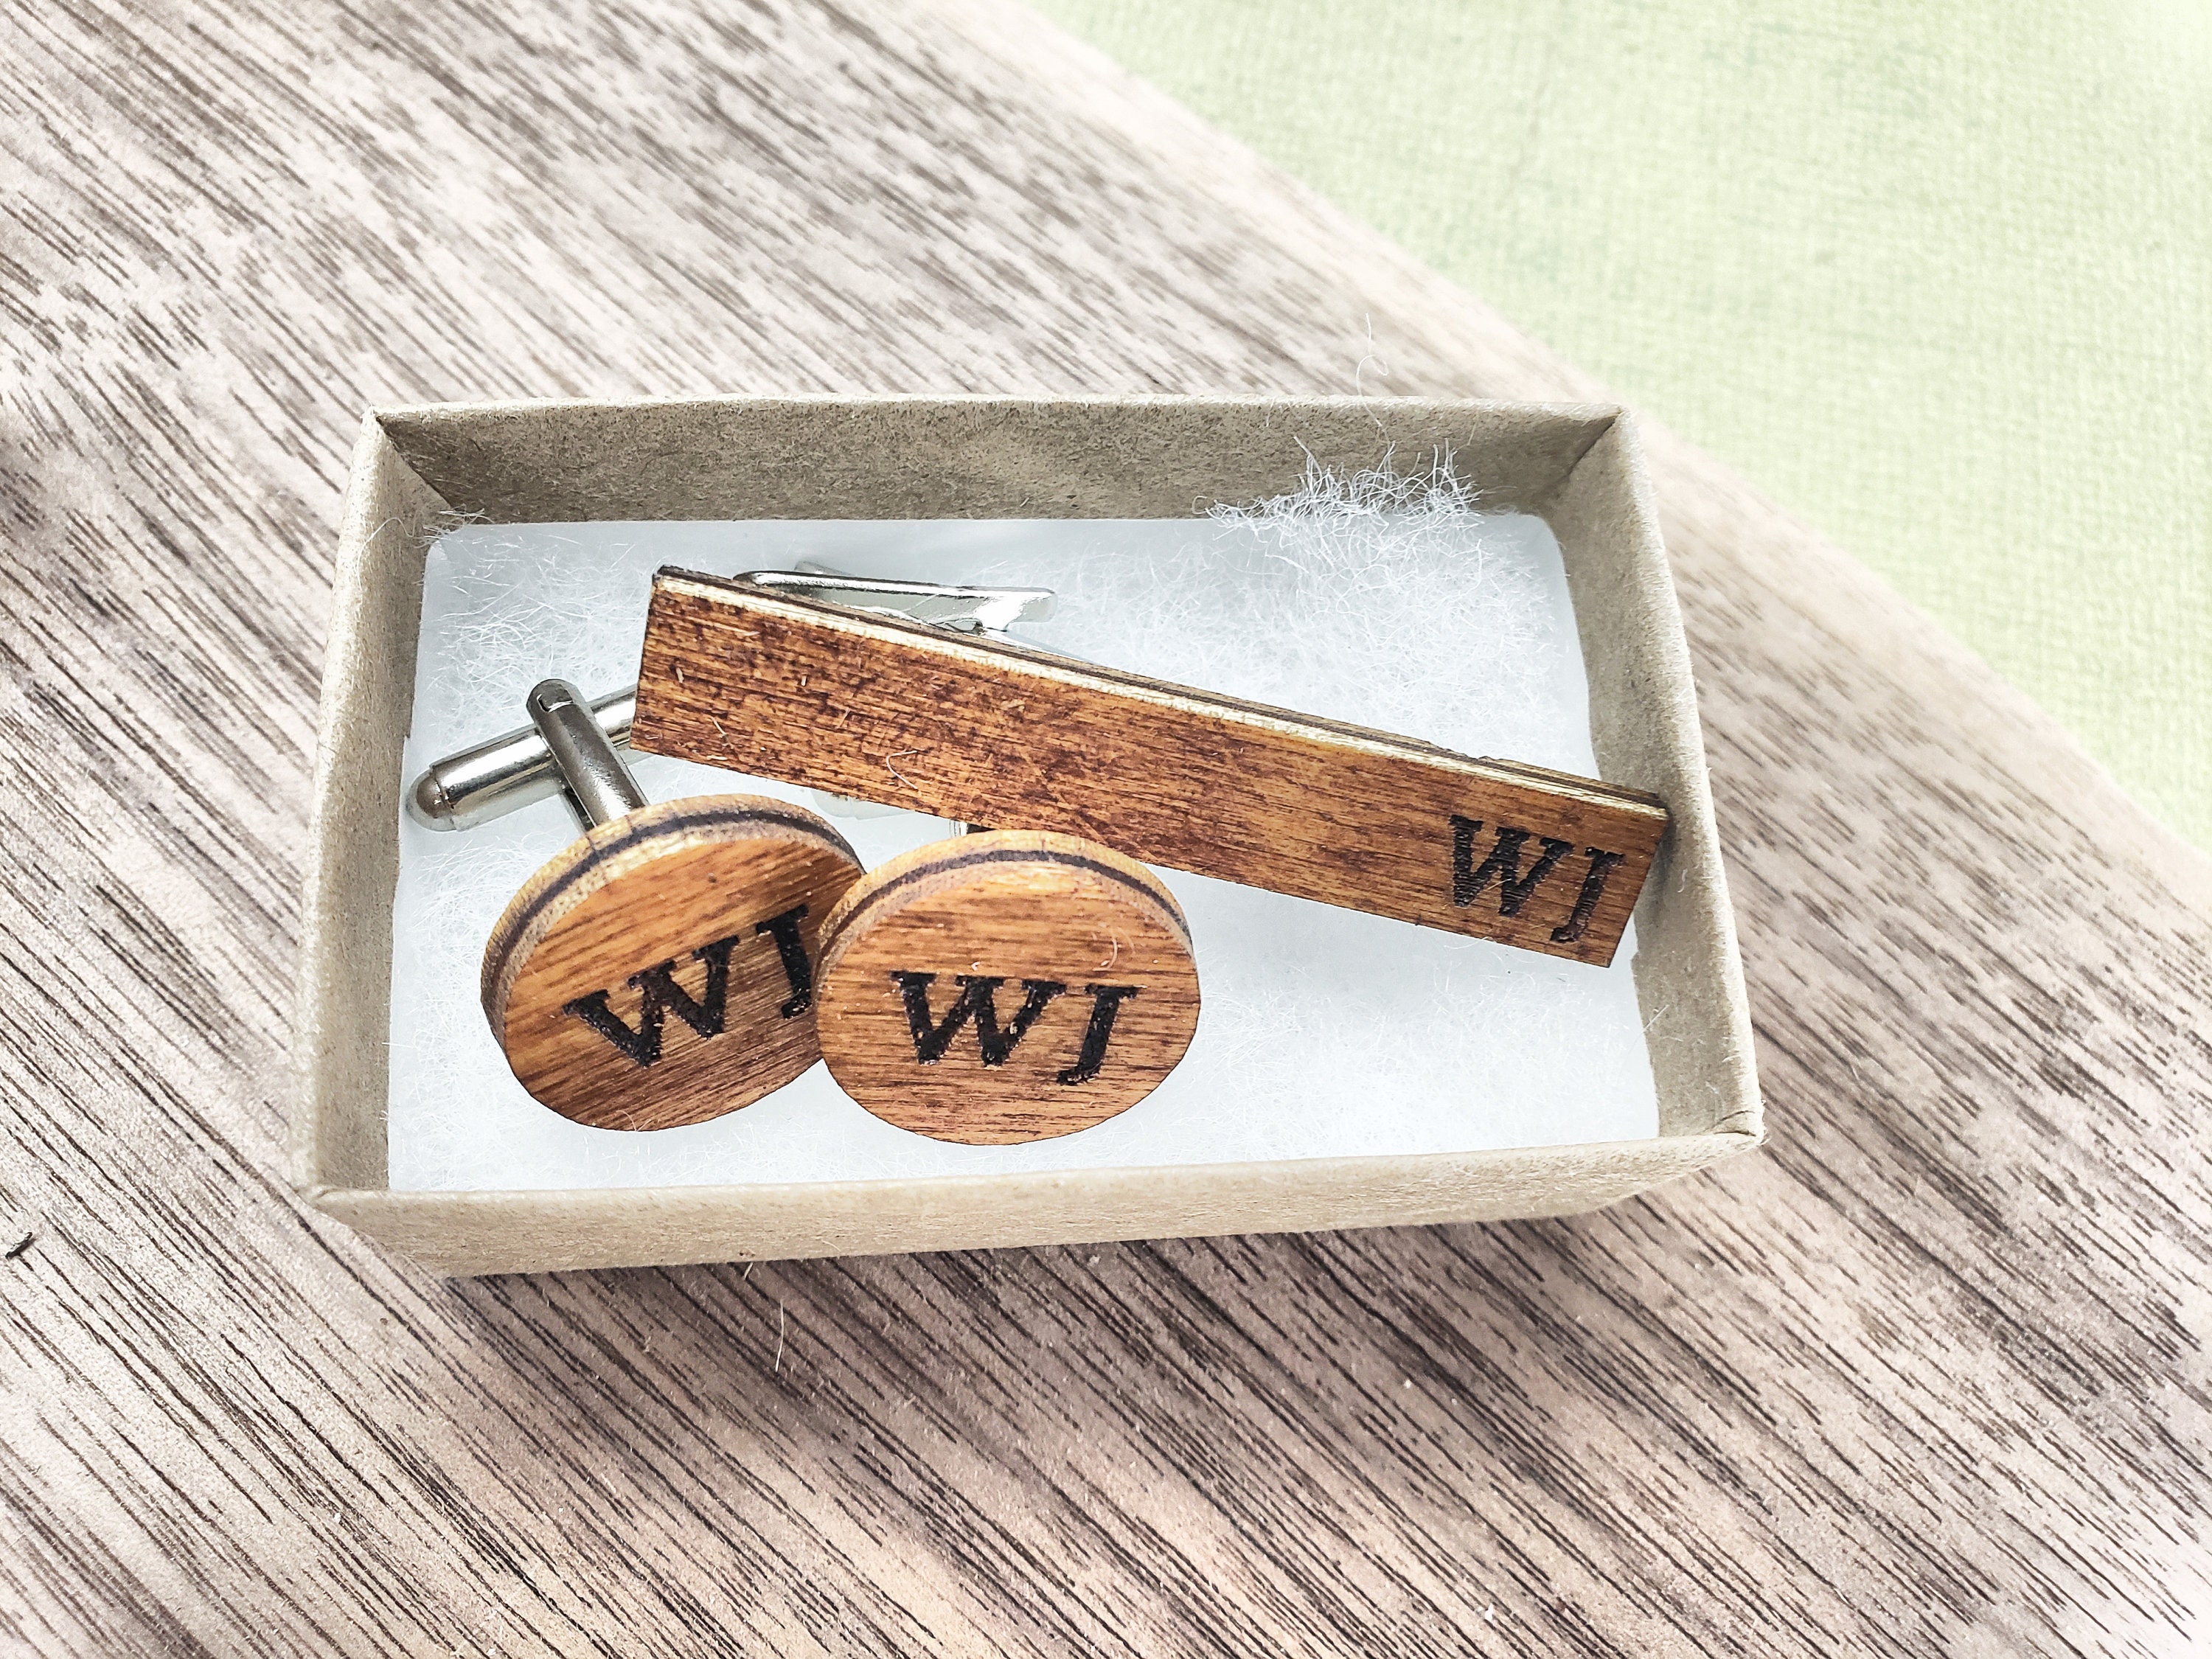 Wooden Accessories Company Wooden Tie Clips with Laser Engraved Tuxedo Design Cherry Wood Tie Bar Engraved in The USA 